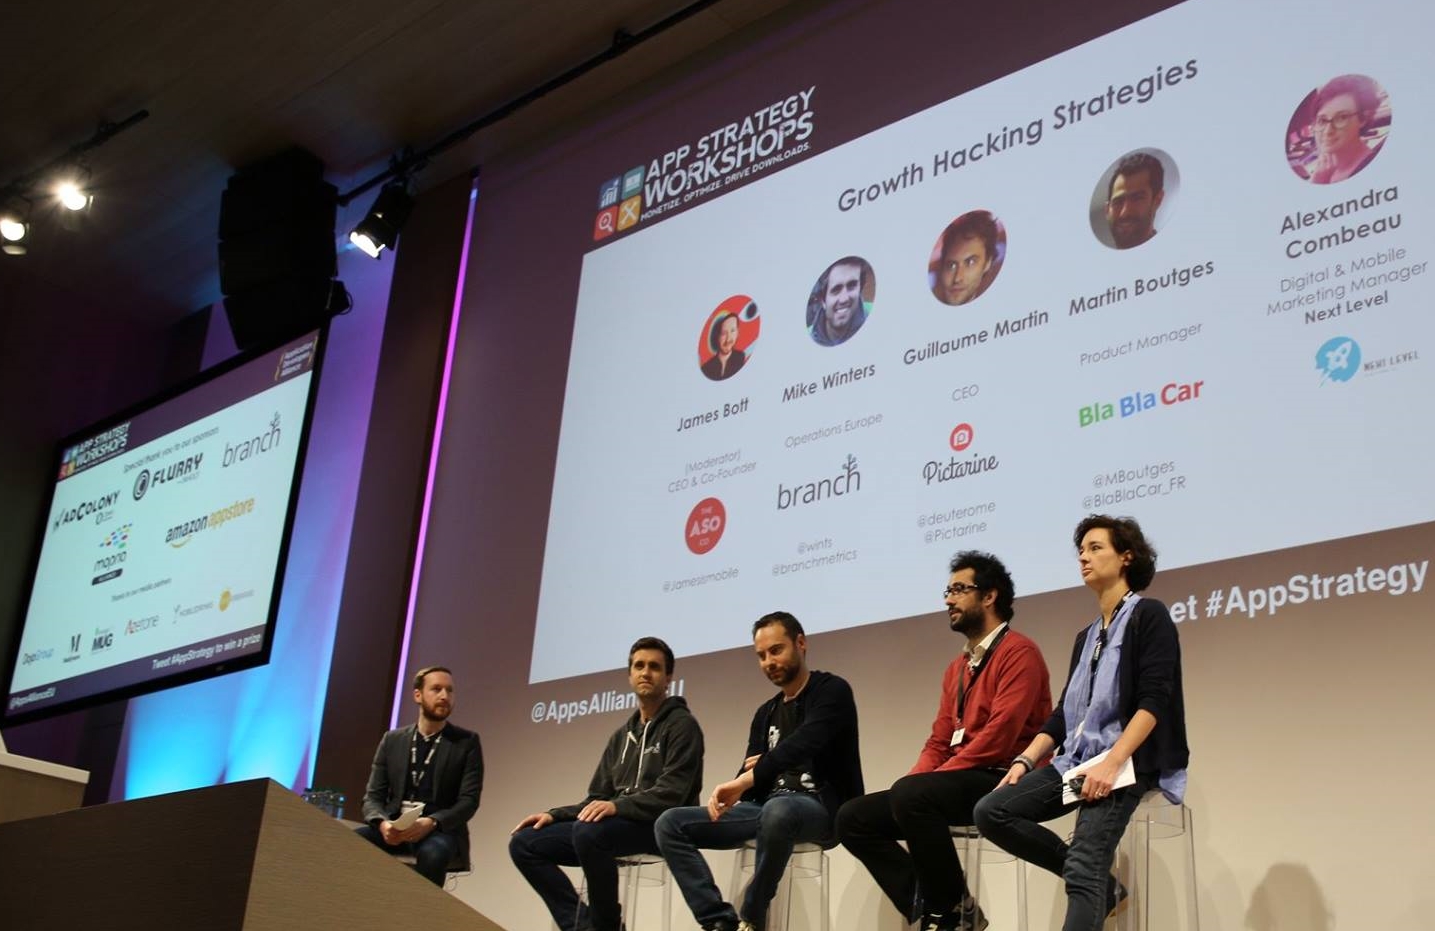 Speaking on the topic of Growth Hacking Strategies were&nbsp;Mike Winters, Operations Europe, Branch Metrics,&nbsp;Guillaume Martin, CEO, Pictarine,&nbsp;Martin Boutges, Product Manager, BlaBlaCar,&nbsp;Alexandra Combeau, Digital &amp; Mobile Market…